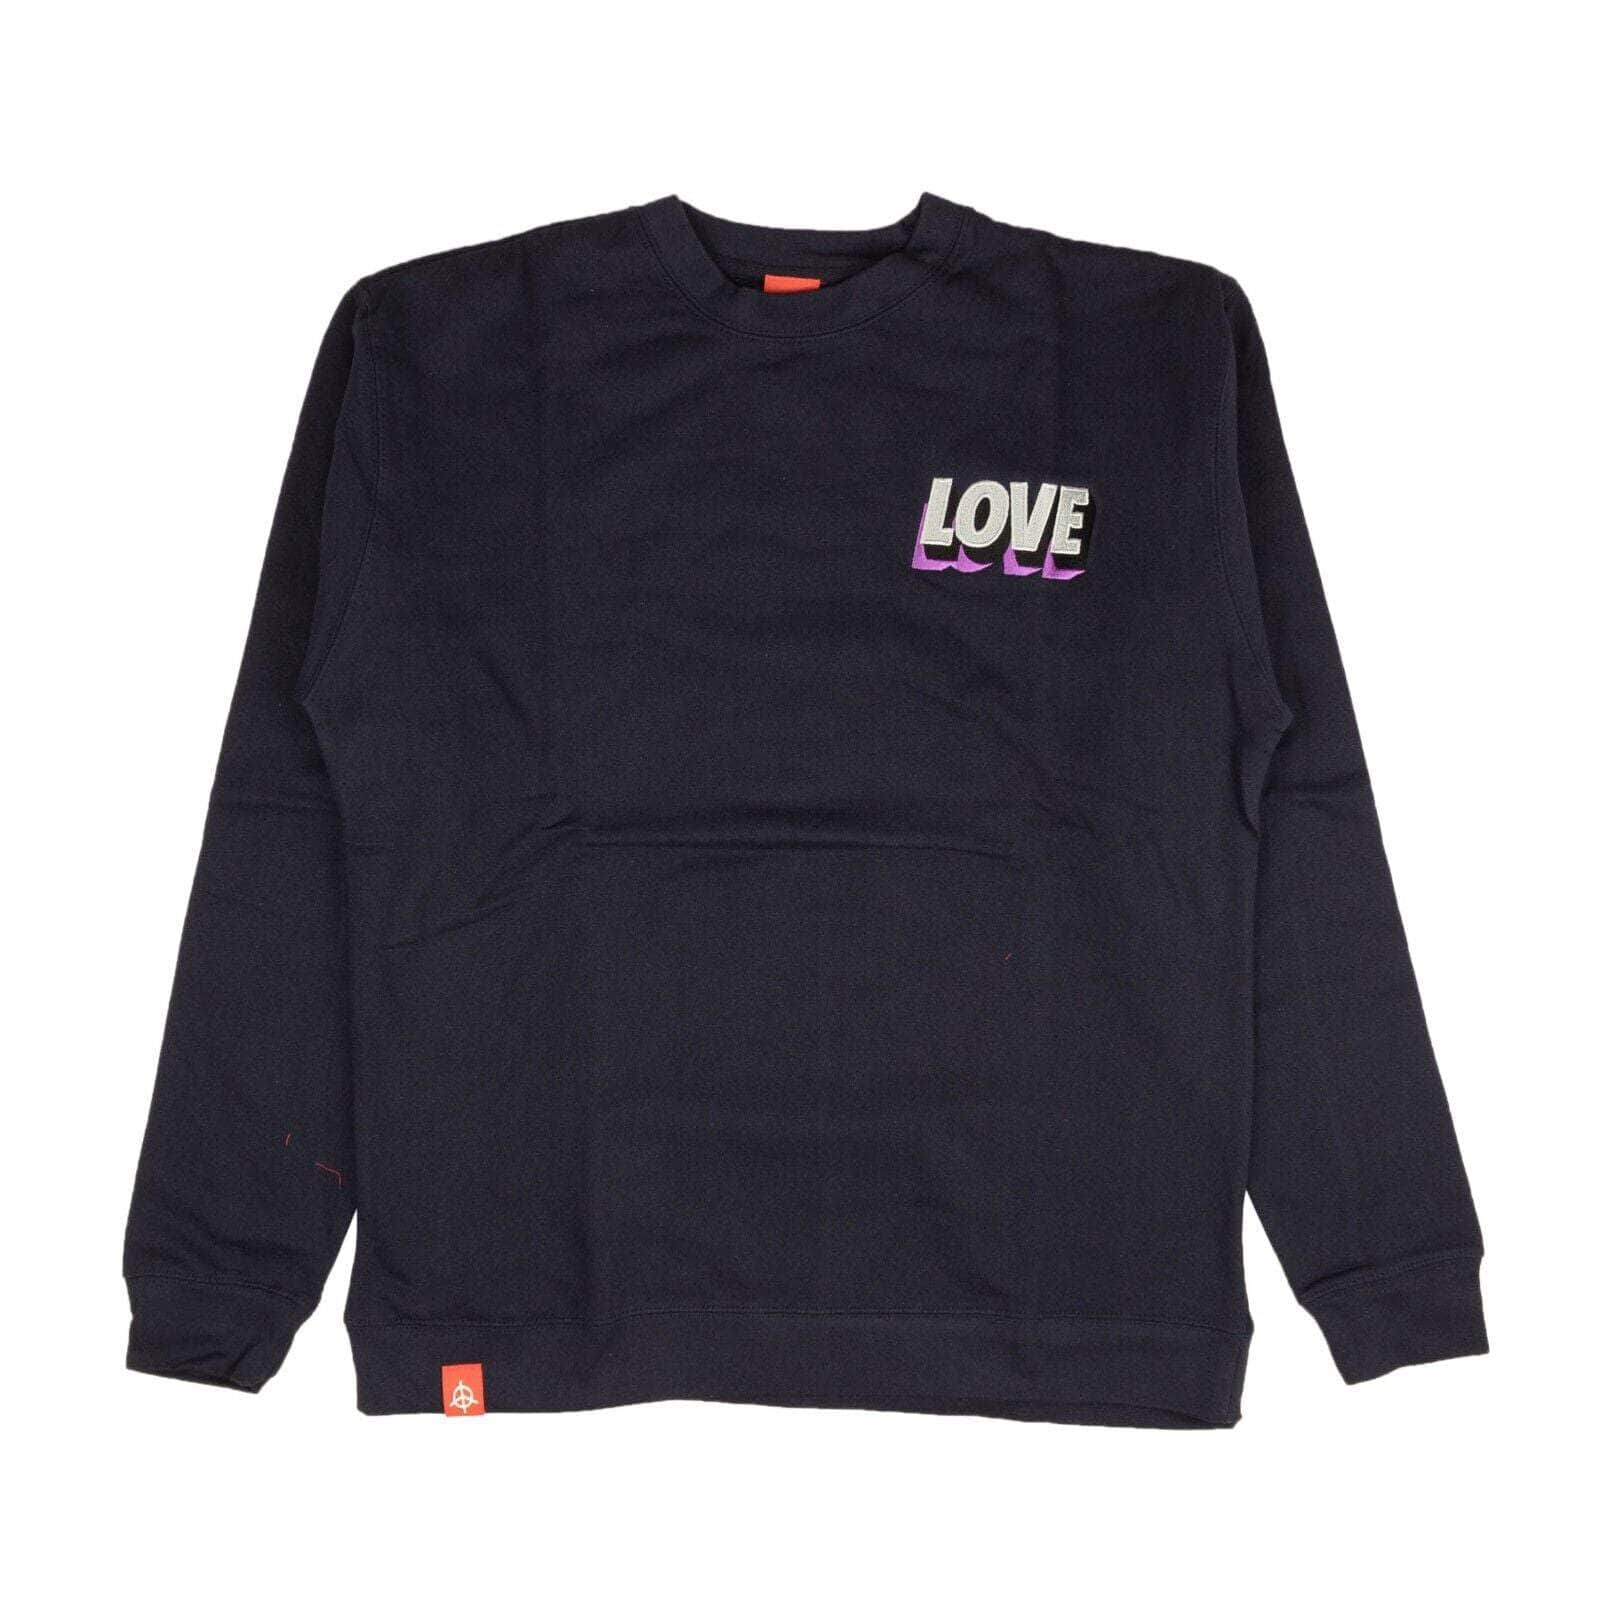 Kids Of Immigrants channelenable-all, chicmi, couponcollection, gender-mens, kids-of-immigrants, main-clothing, mens-shoes, MixedApparel, size-l, size-m, under-250 M Blue Essential Spread Love Sweatshirt 95-KOI-1002/M 95-KOI-1002/M